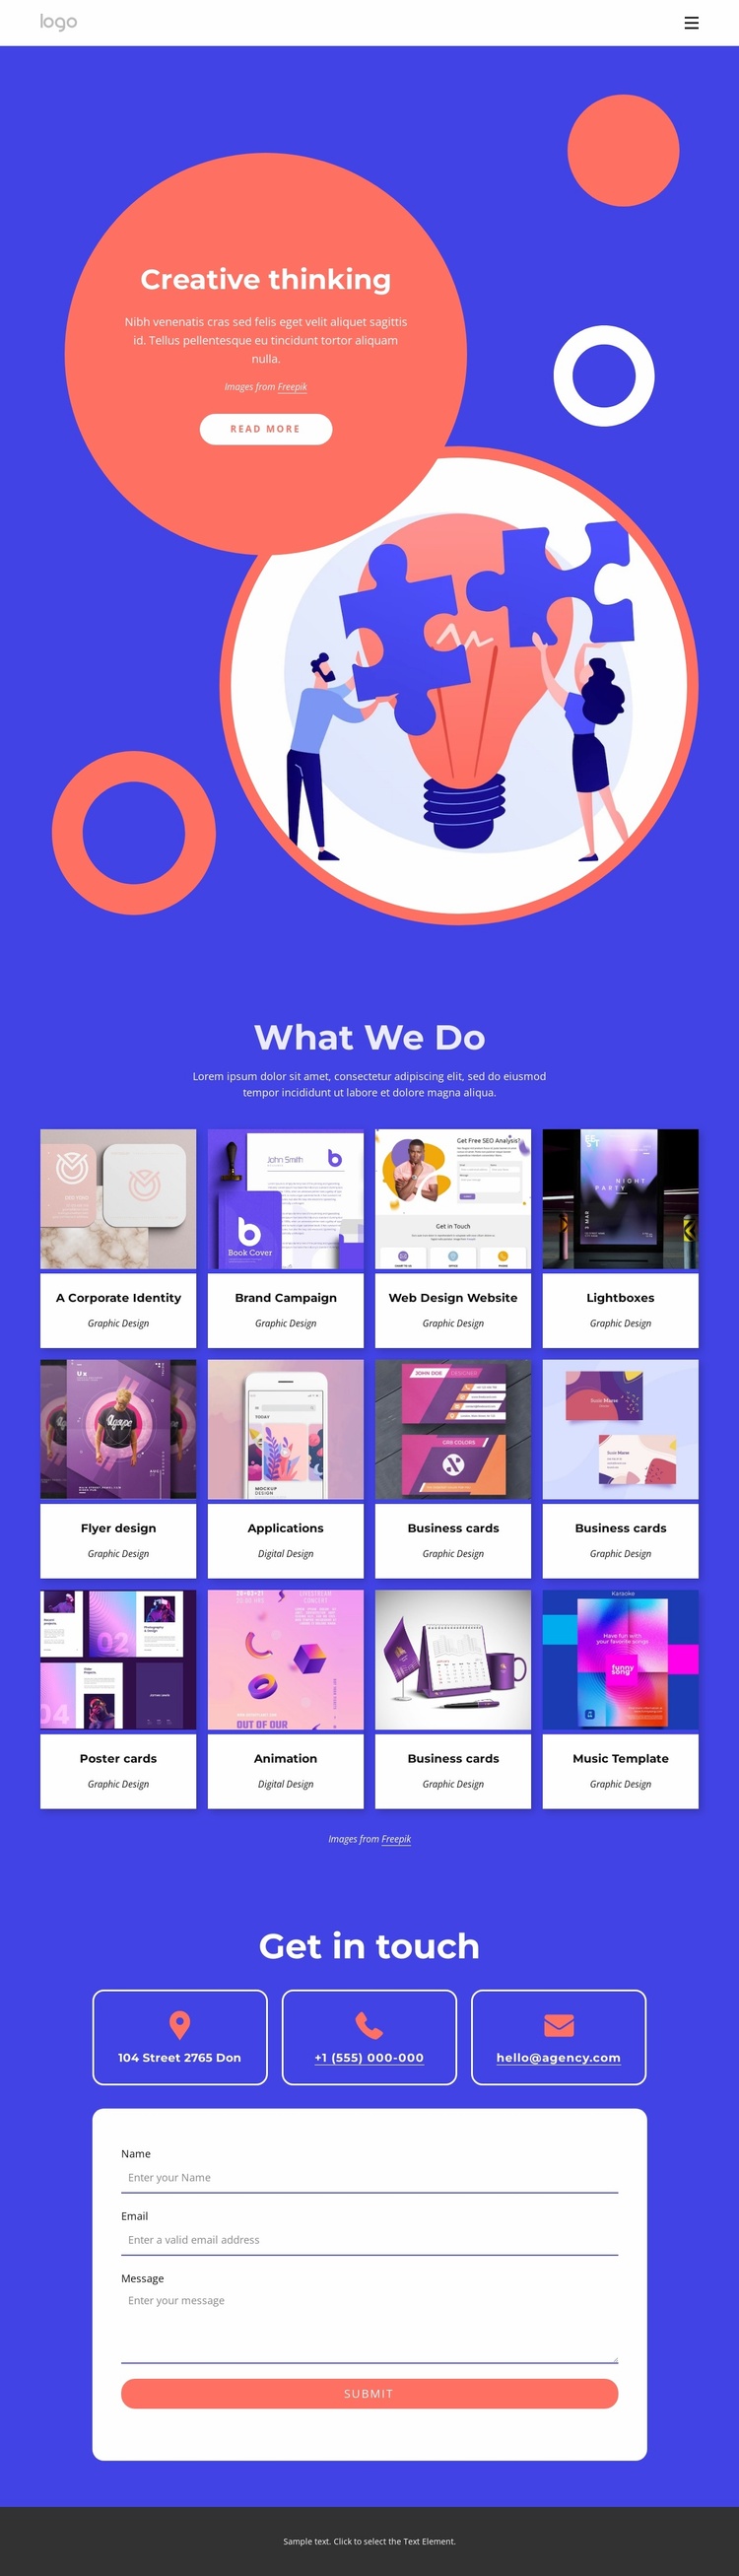 Campaigns, mobile and digital eCommerce Template